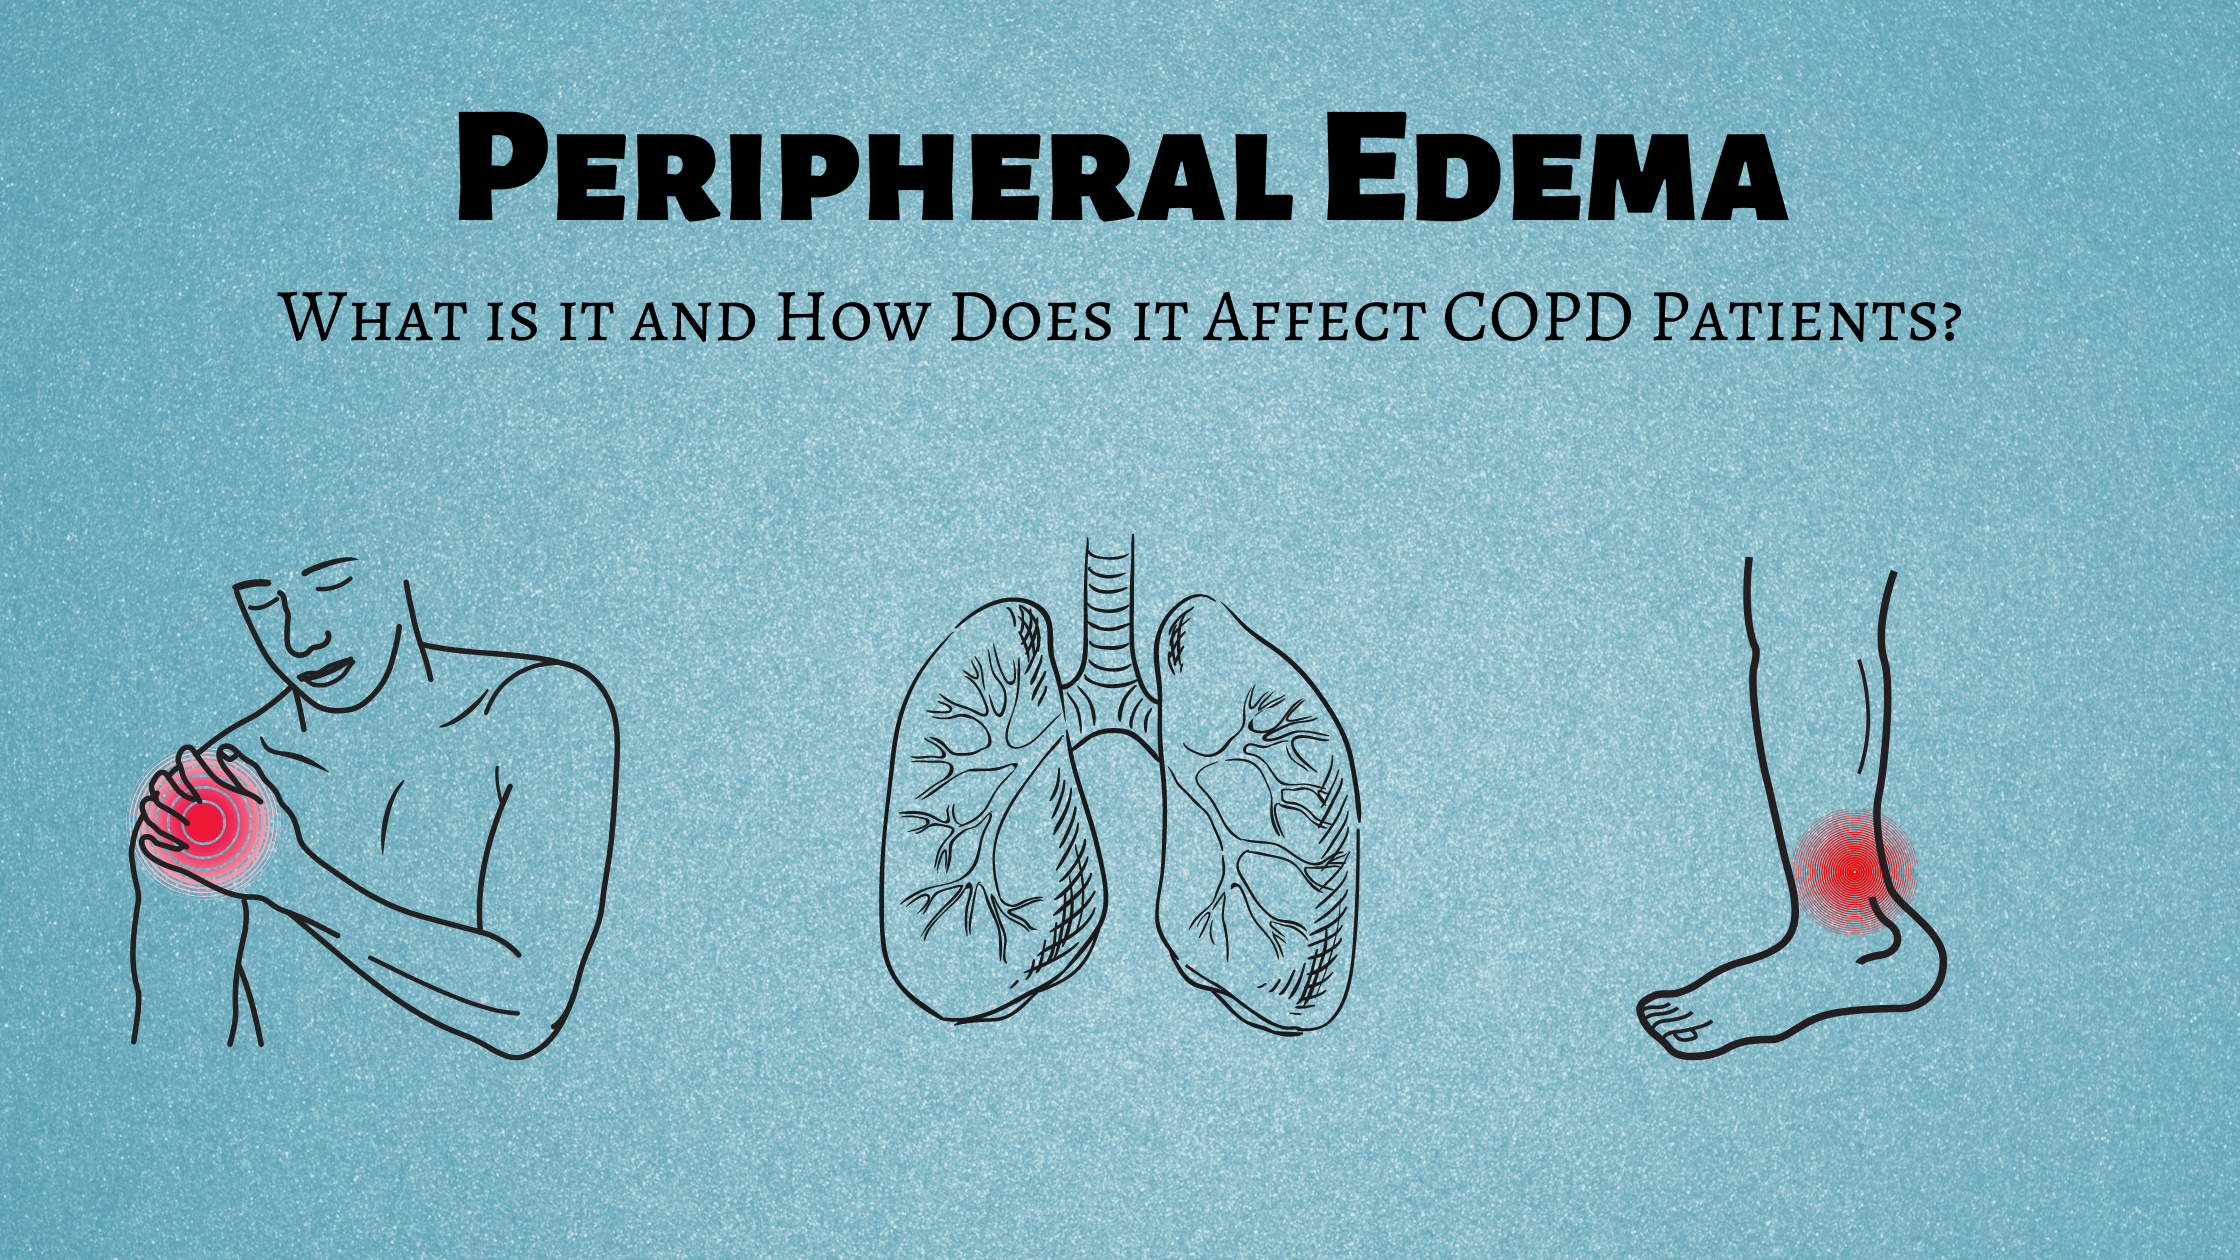 Peripheral Edema: What is it and How Does it Affect COPD Patients?